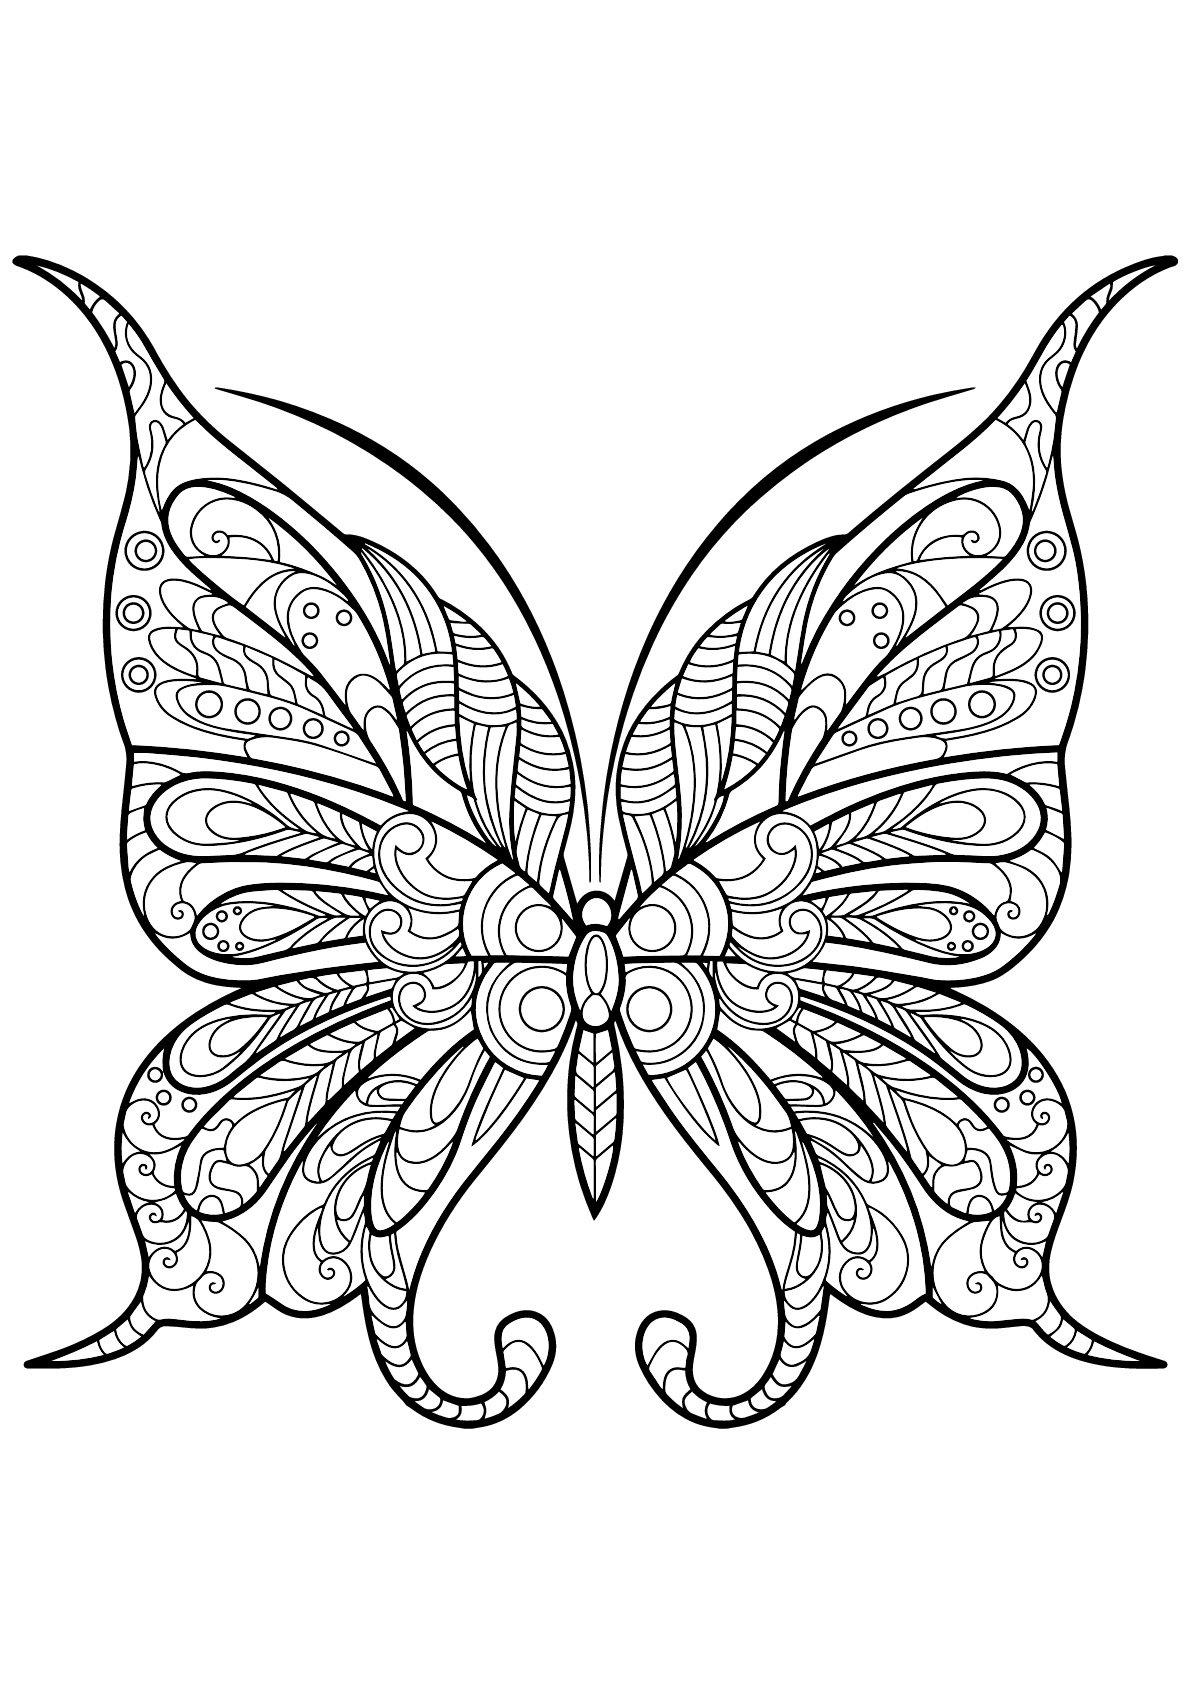 Free Printable Butterfly Coloring Pages - Butterflies Kids Coloring Pages